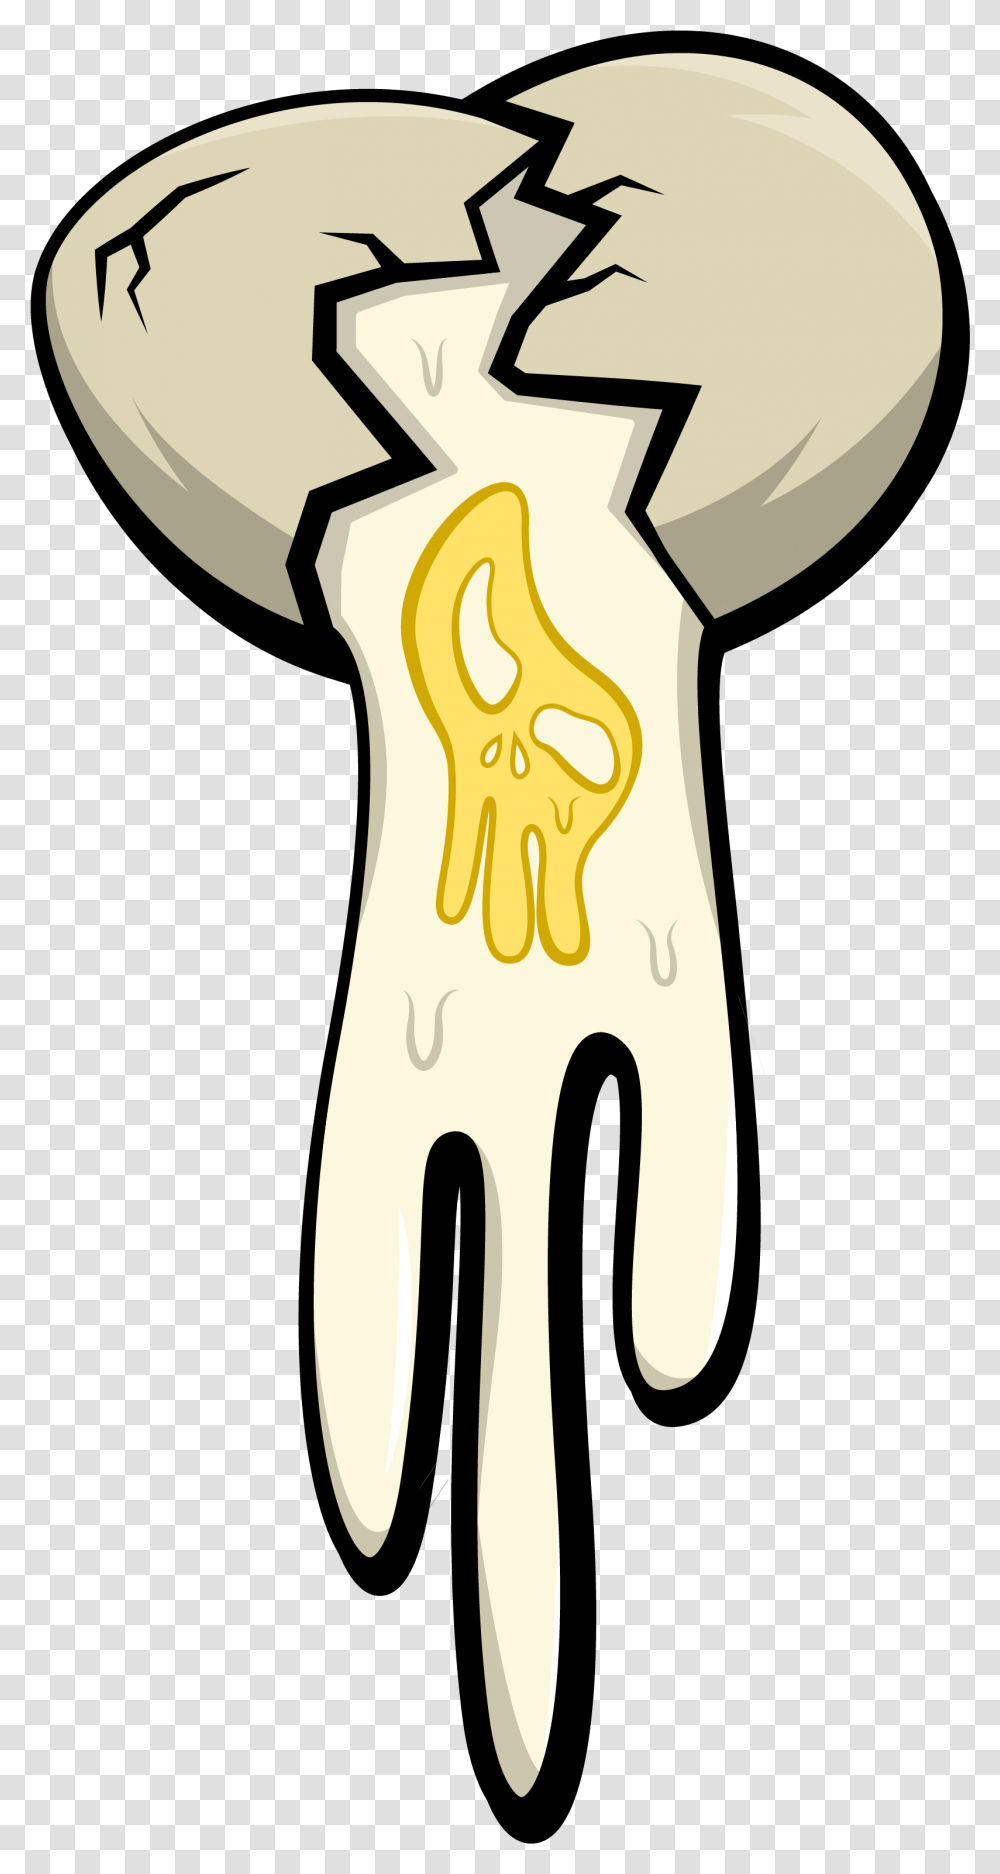 Crack An Egg Cartoon Egg Cracked, Sweets, Food, Confectionery, Stain Transparent Png